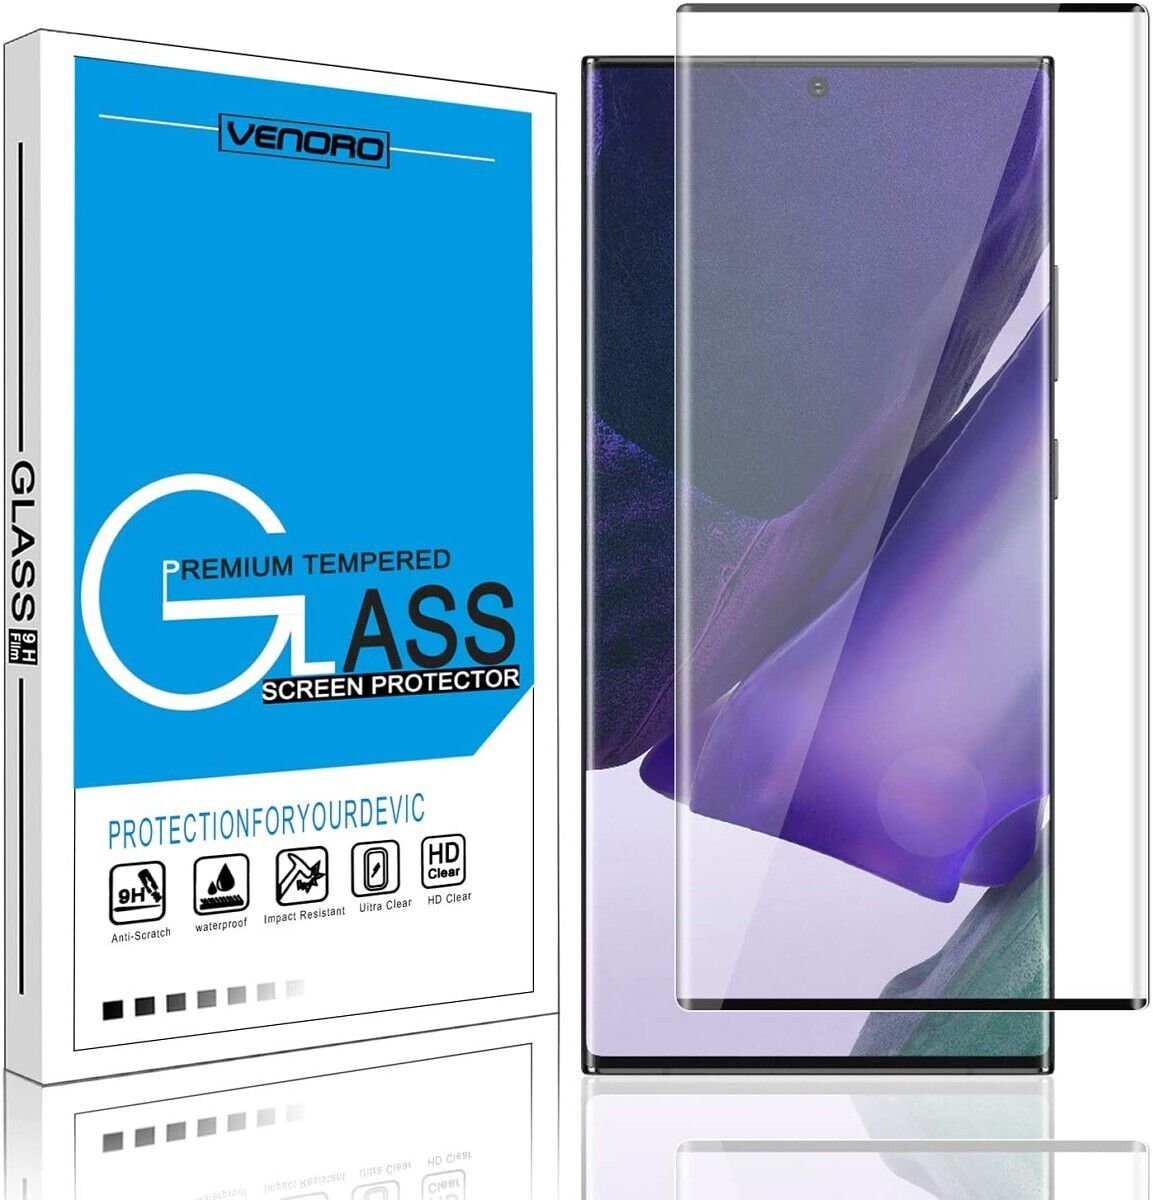 Venoro are a reputable brand, and this tempered glass screen protector should protect your Galaxy Note 20 Ultra nicely. It has an oleophobic coating too, so it won't feel different to your normal screen.